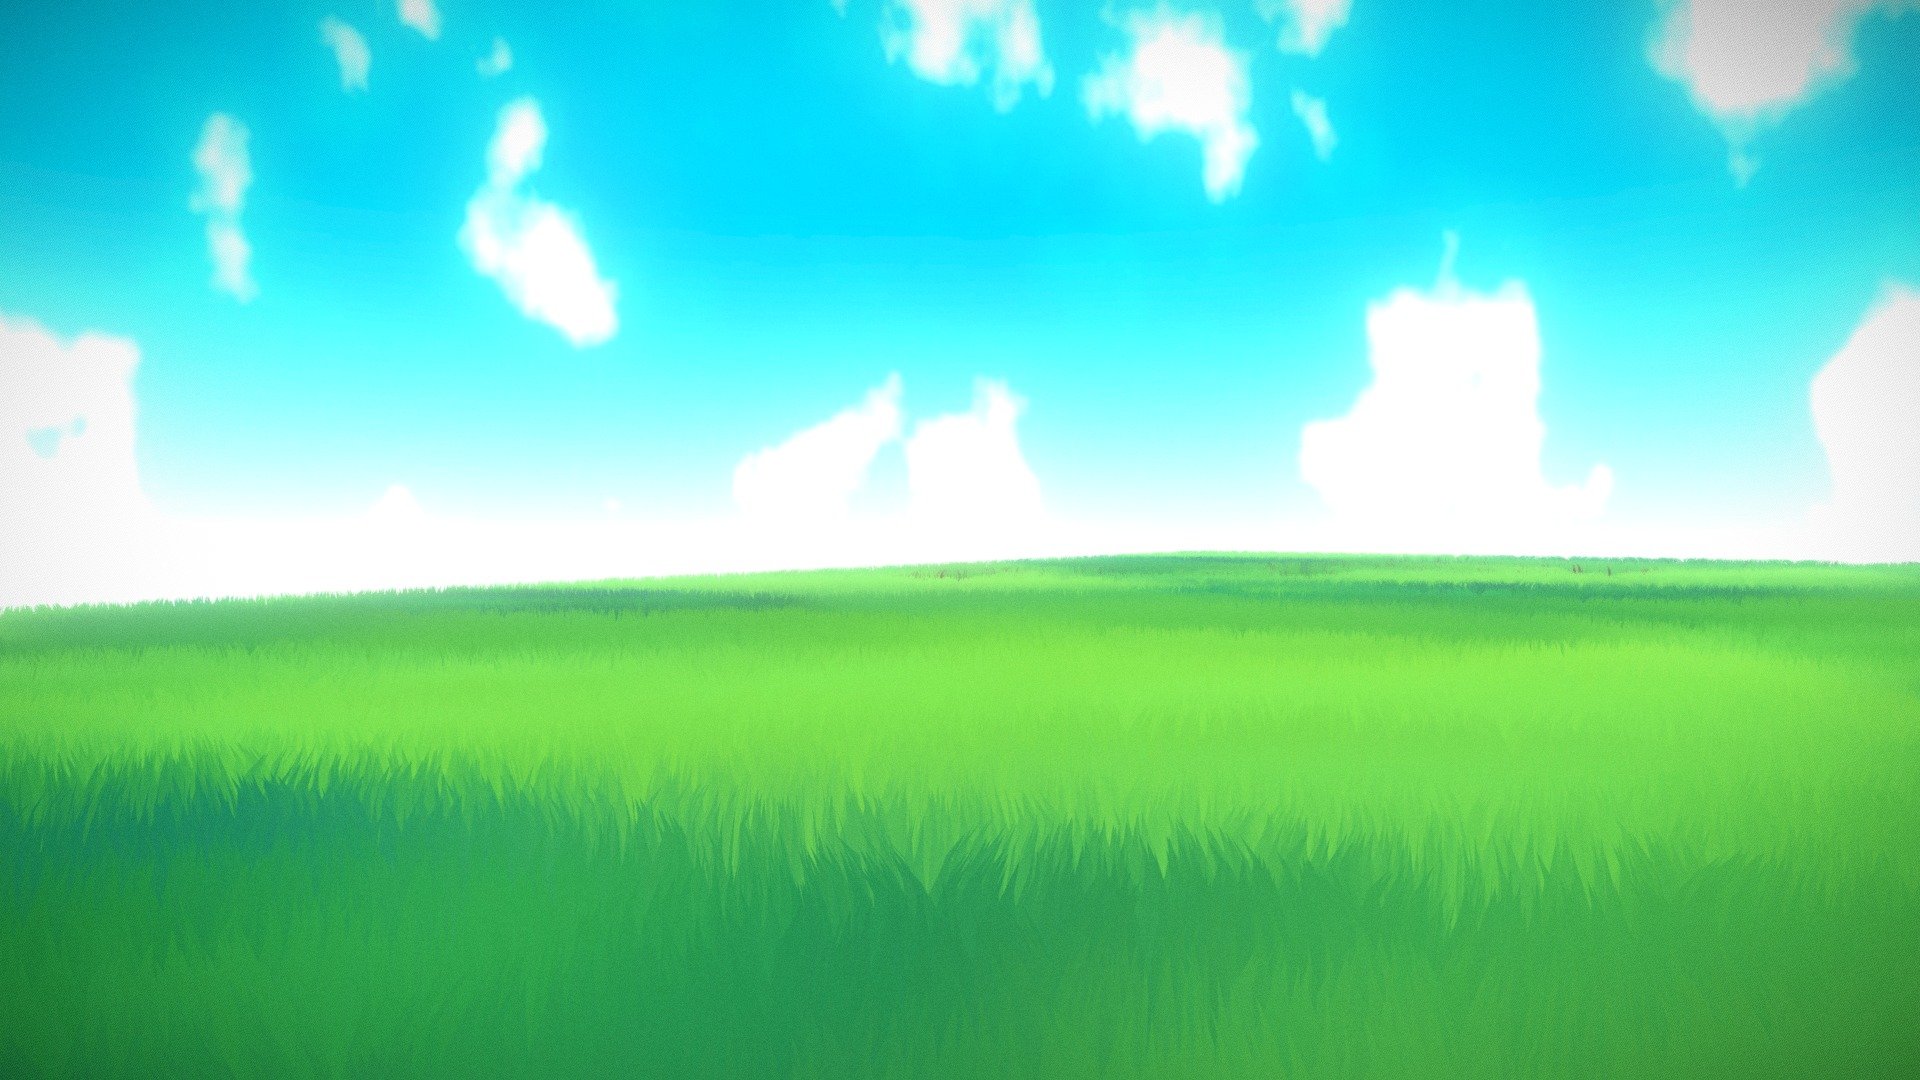 Anime Scenery Nature Grass Field White Clouds Blue Sky HD Anime Girl  Wallpapers  HD Wallpapers  ID 105678